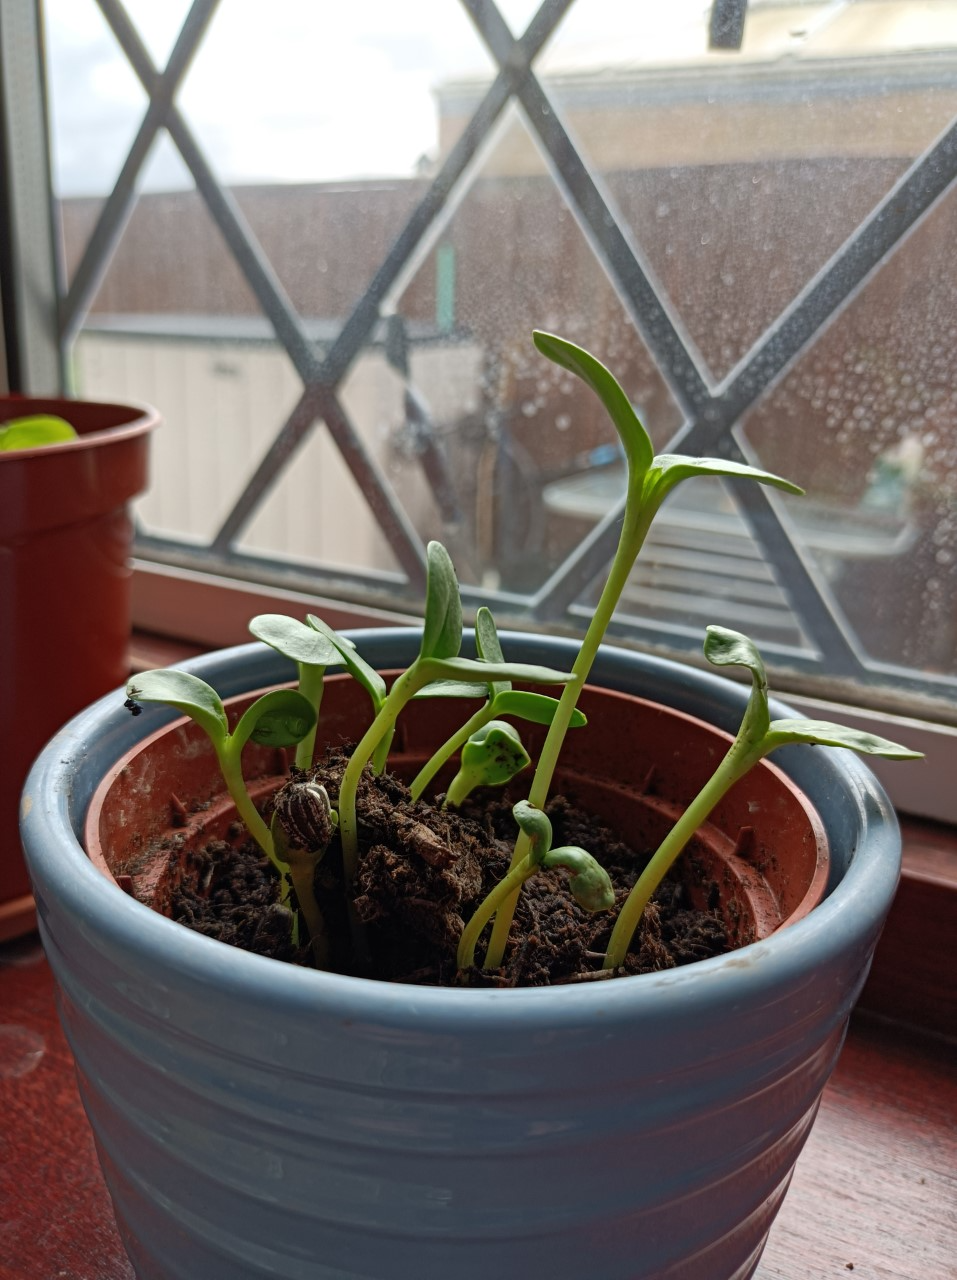 Emma S - Here's a picture of how my sunflowers are getting on. The tallest is measuring 9cm!